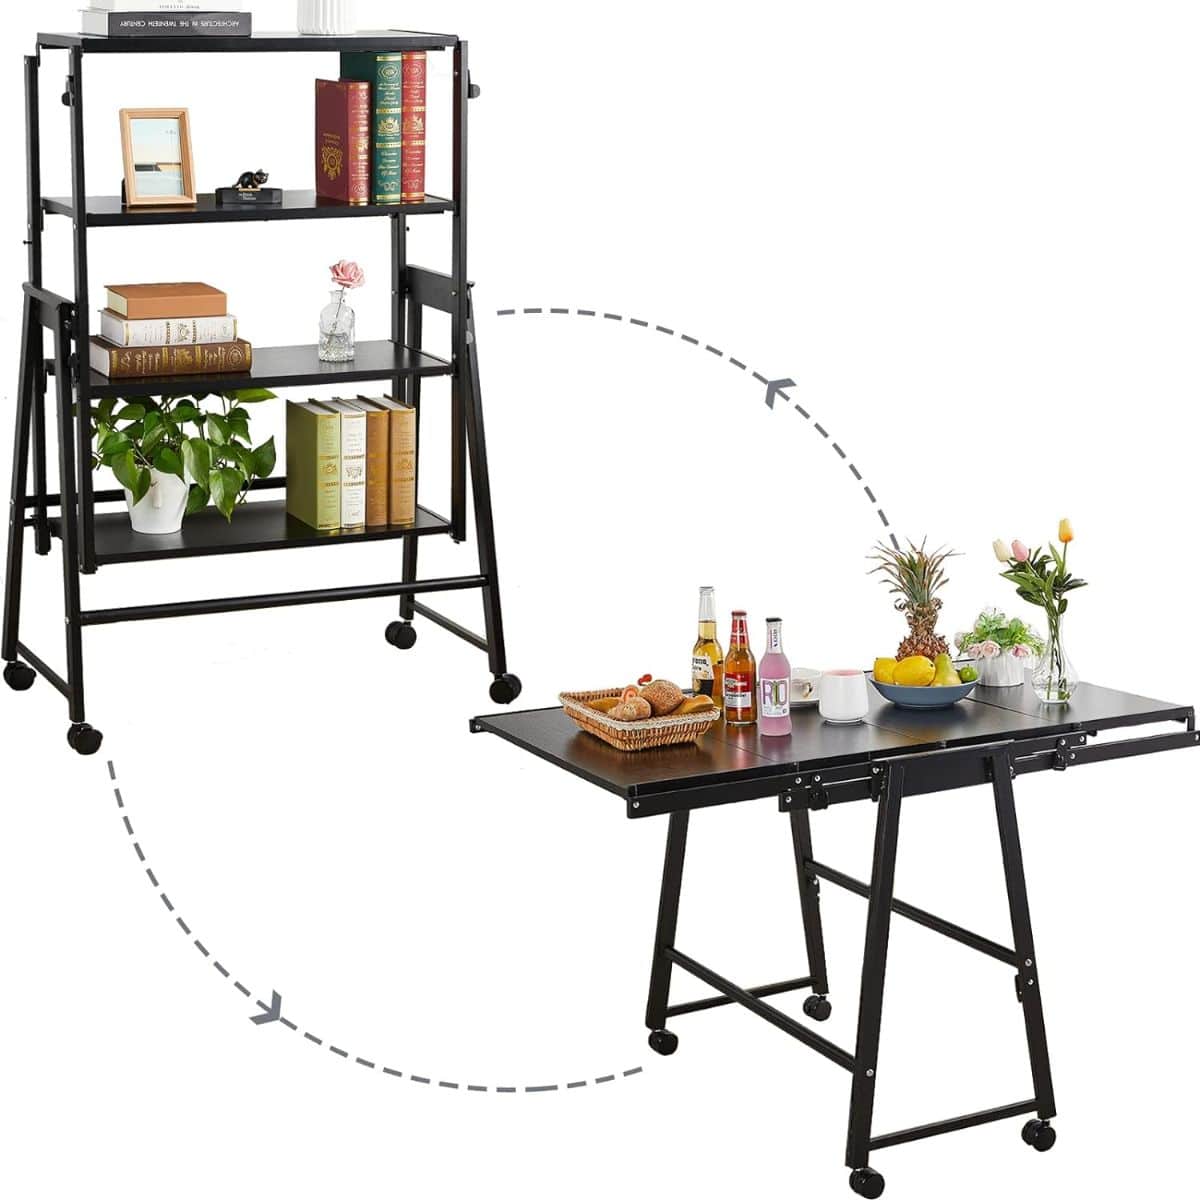 2-in-1 Convertible Shelf to Table with Wheels